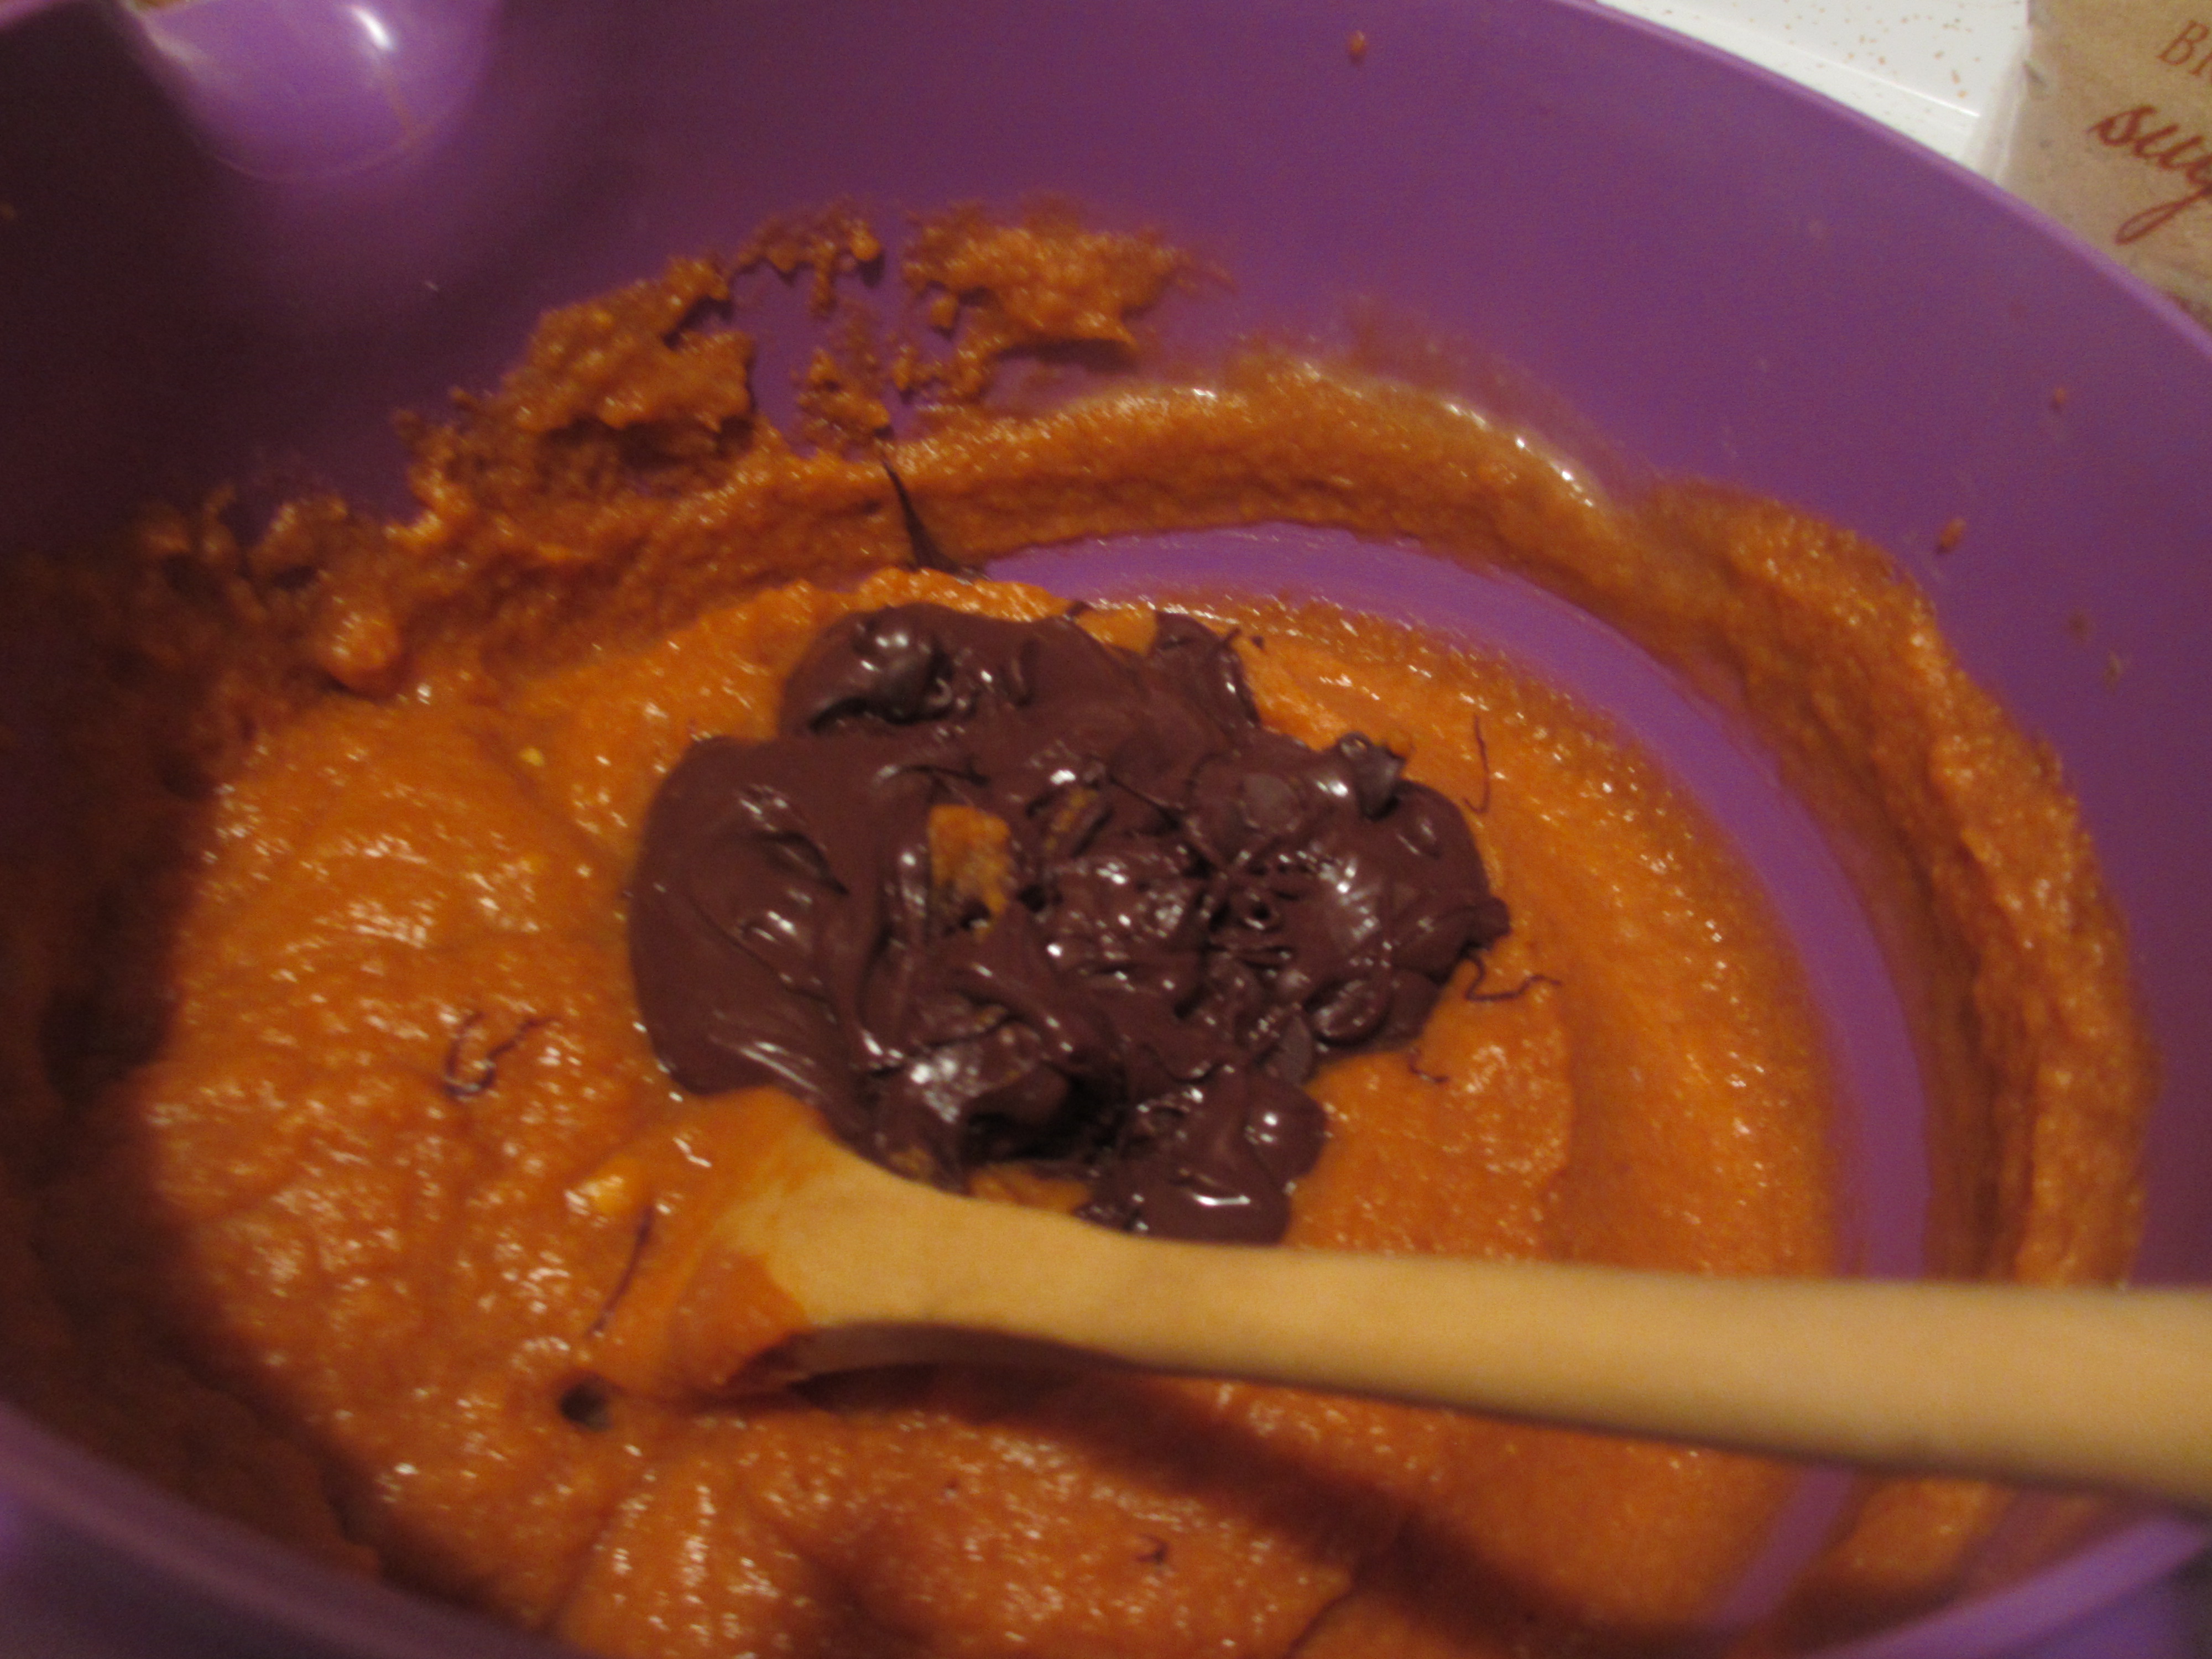 Pumpkin and melted chocolate